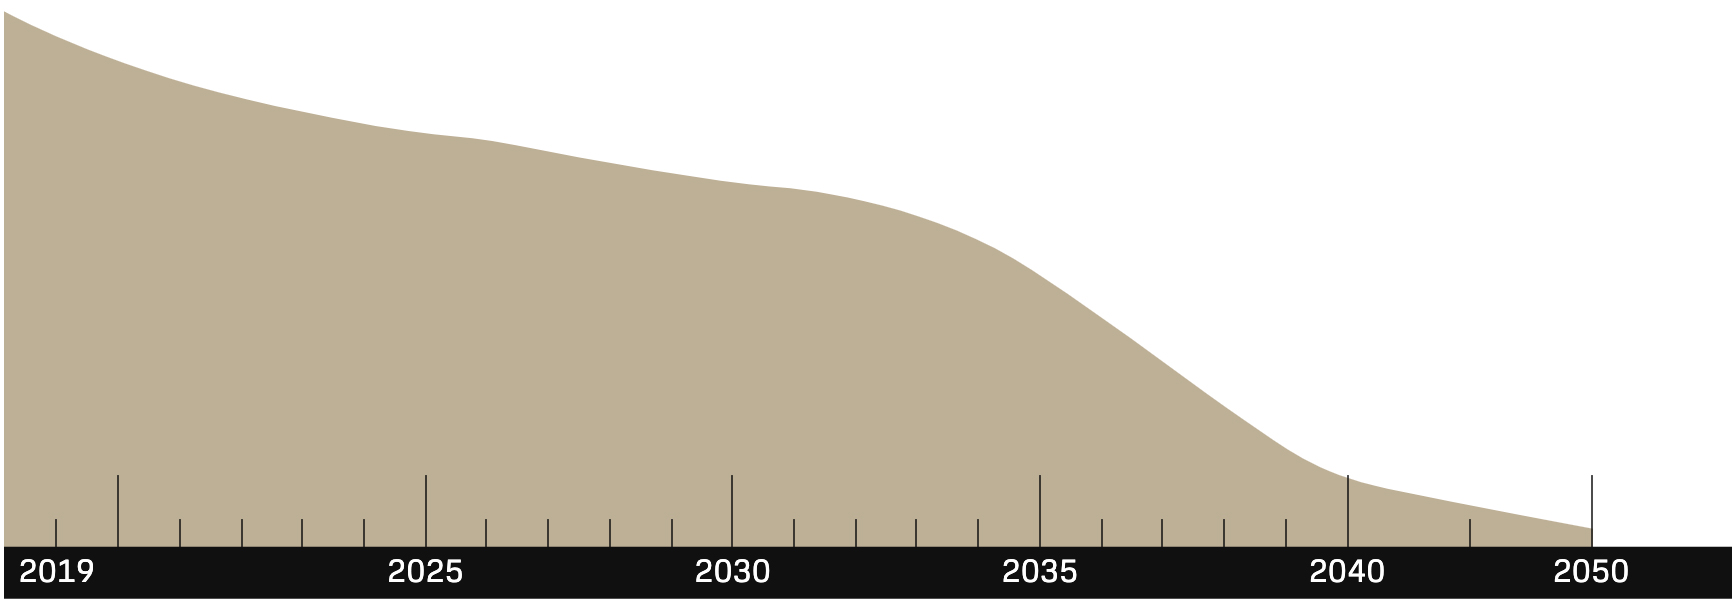 An illustration showing a steady reduction of GHG emissions in scope 3 from 2019 to 2050.